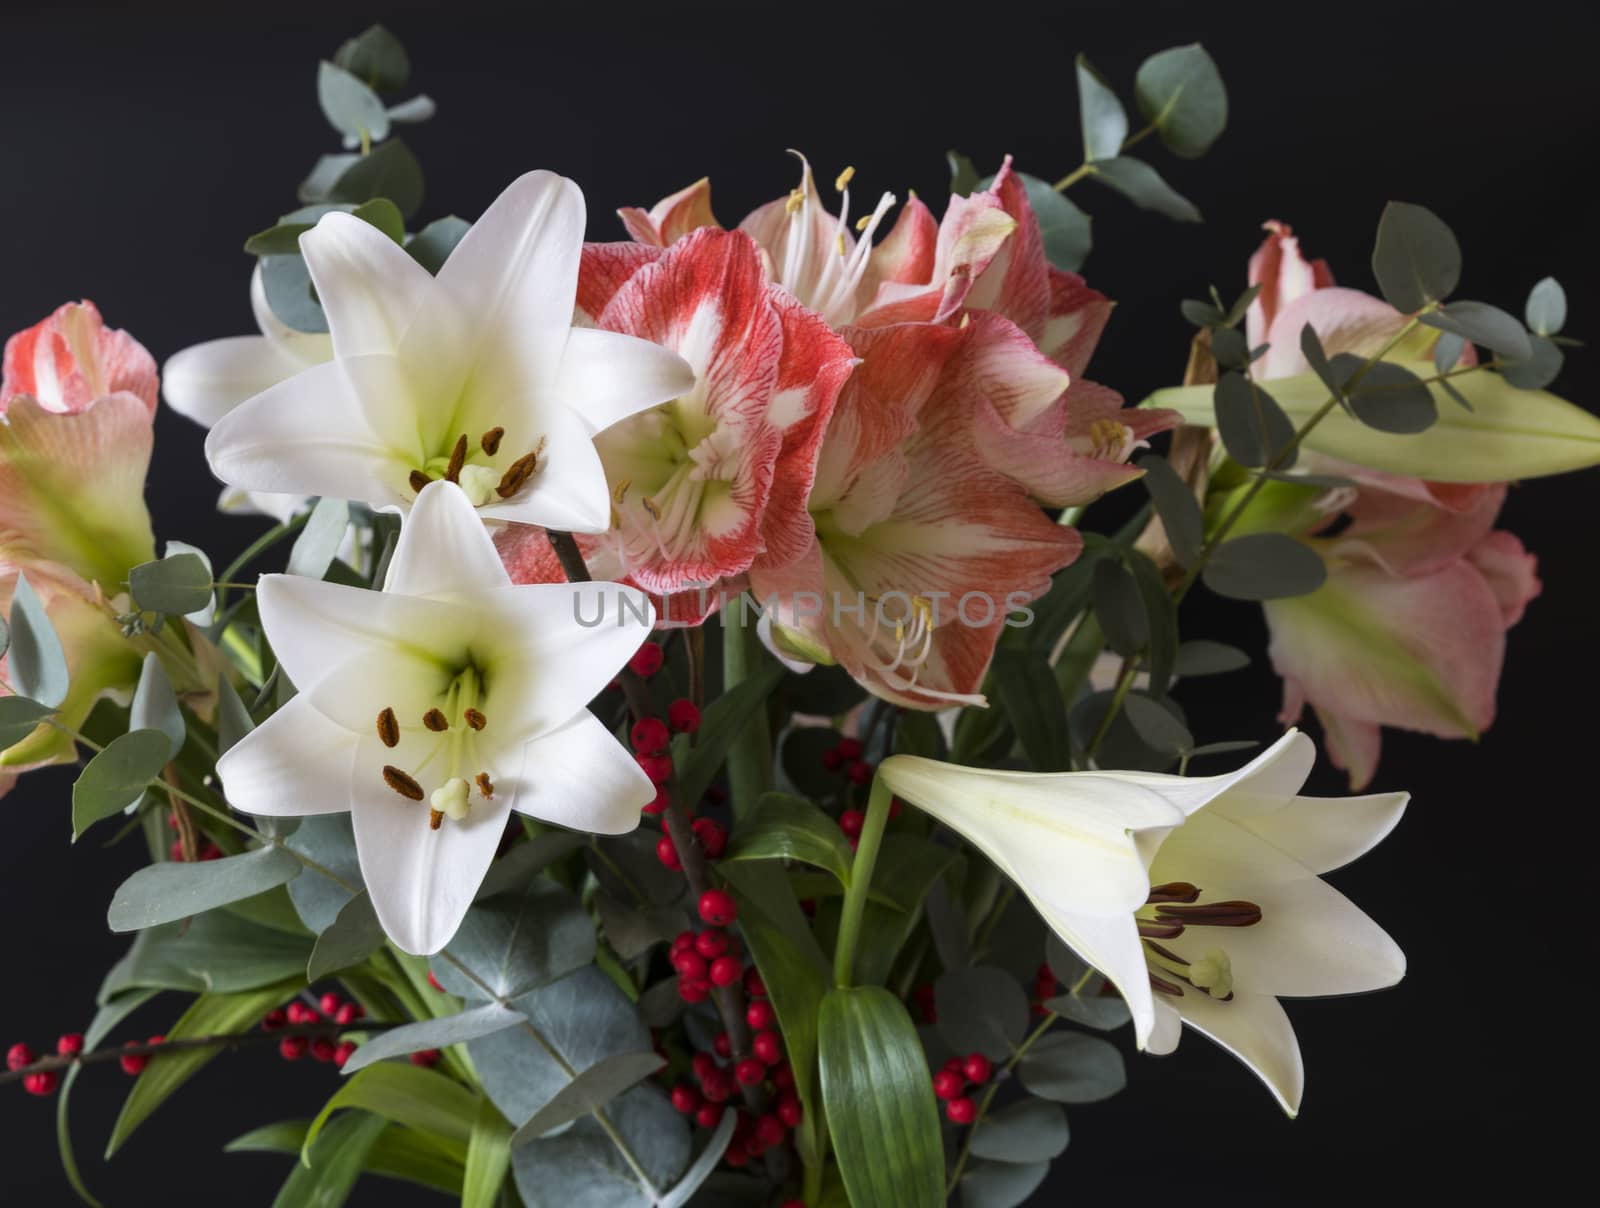 bouquet of flowers with white lily and red amaryllis and red bellies on a black background